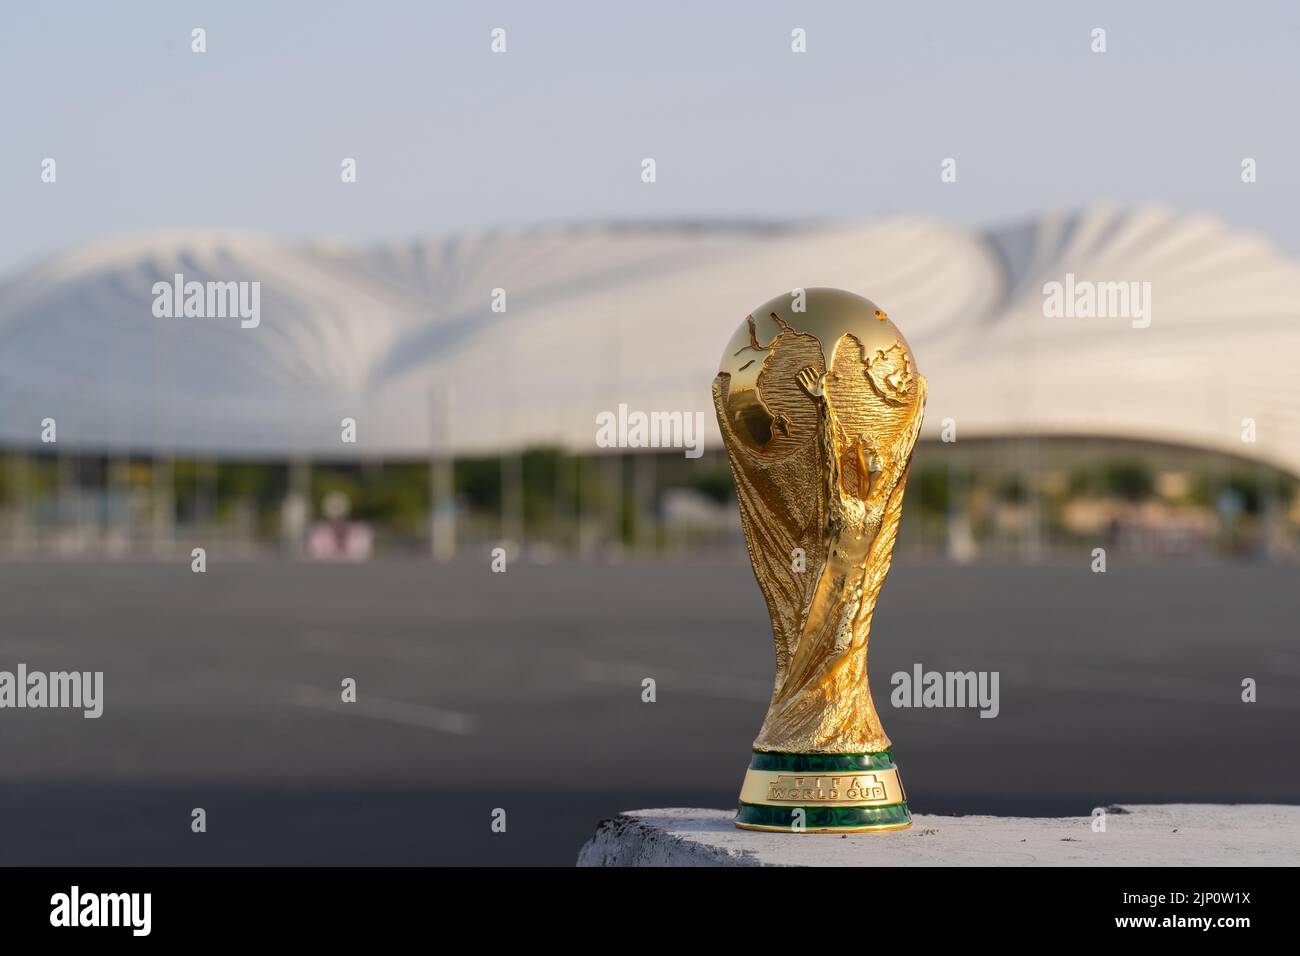 DOHA, QATAR - AUGUST 14, 2022: Trophy of the FIFA World Cup against the backdrop of the Al Janoub stadium in Qatar. Stock Photo